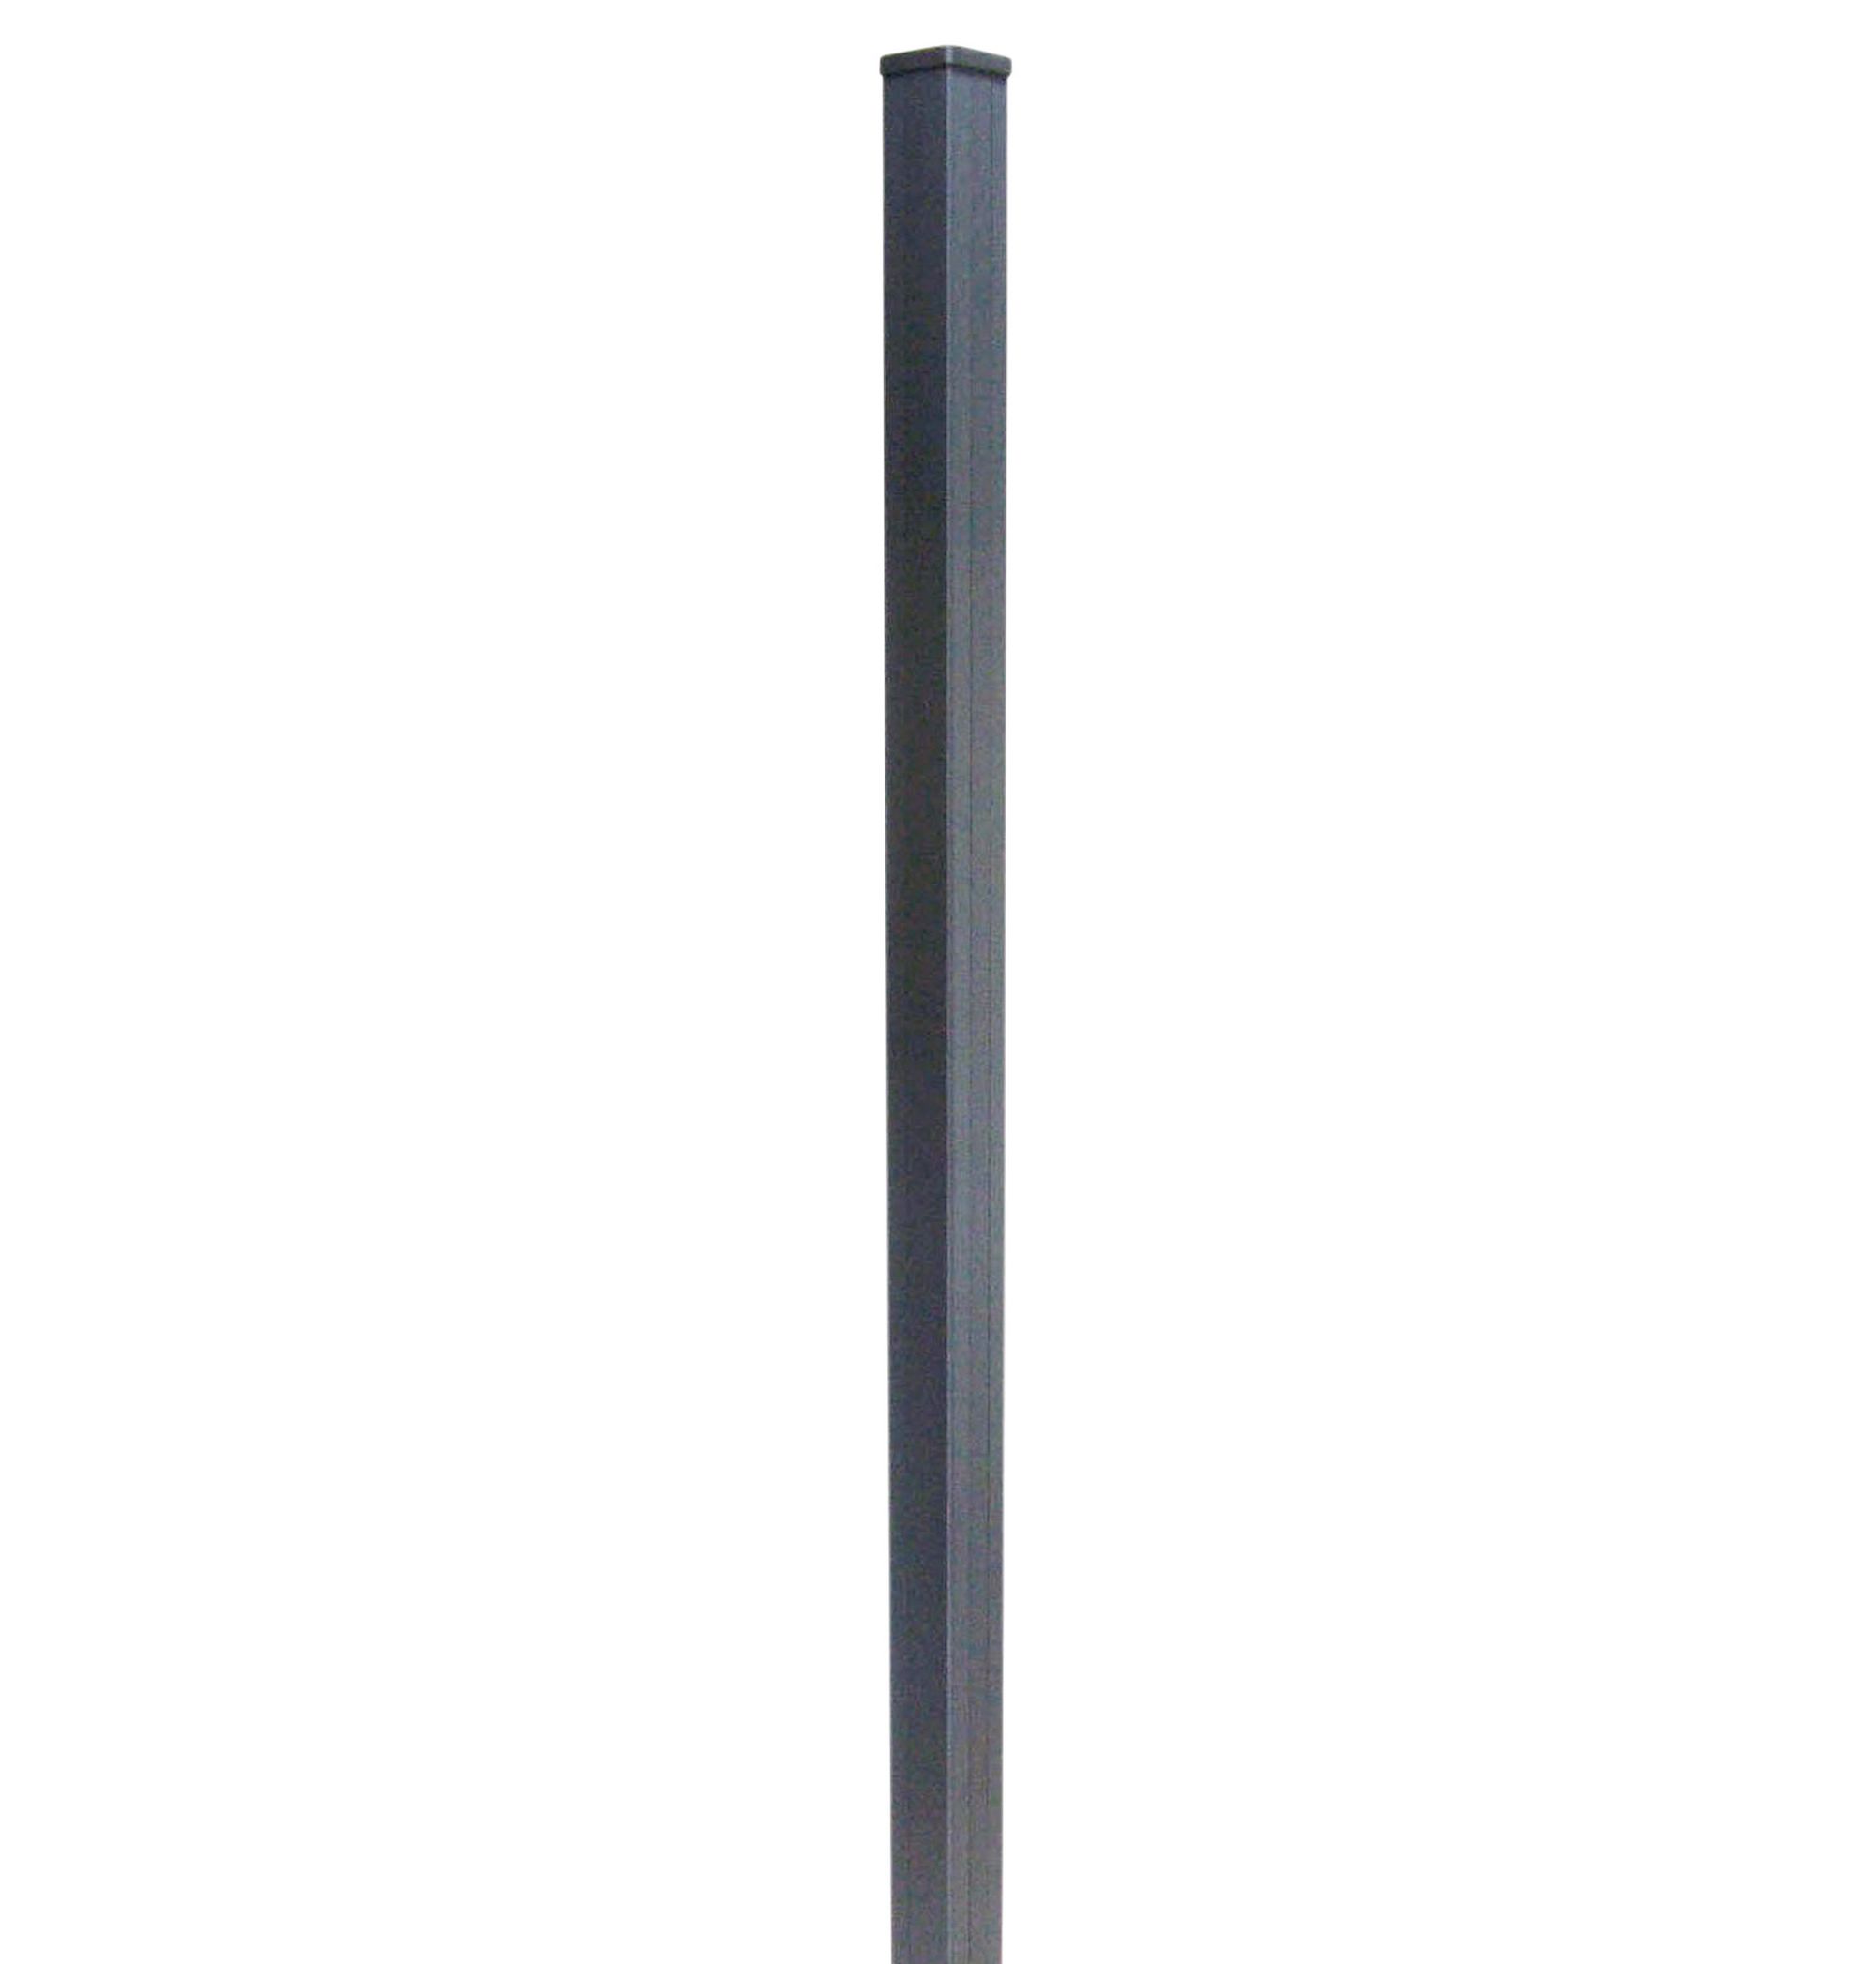 GoodHome Neva Taupe Square Metal Fence post (H)1.39m (W)70mm